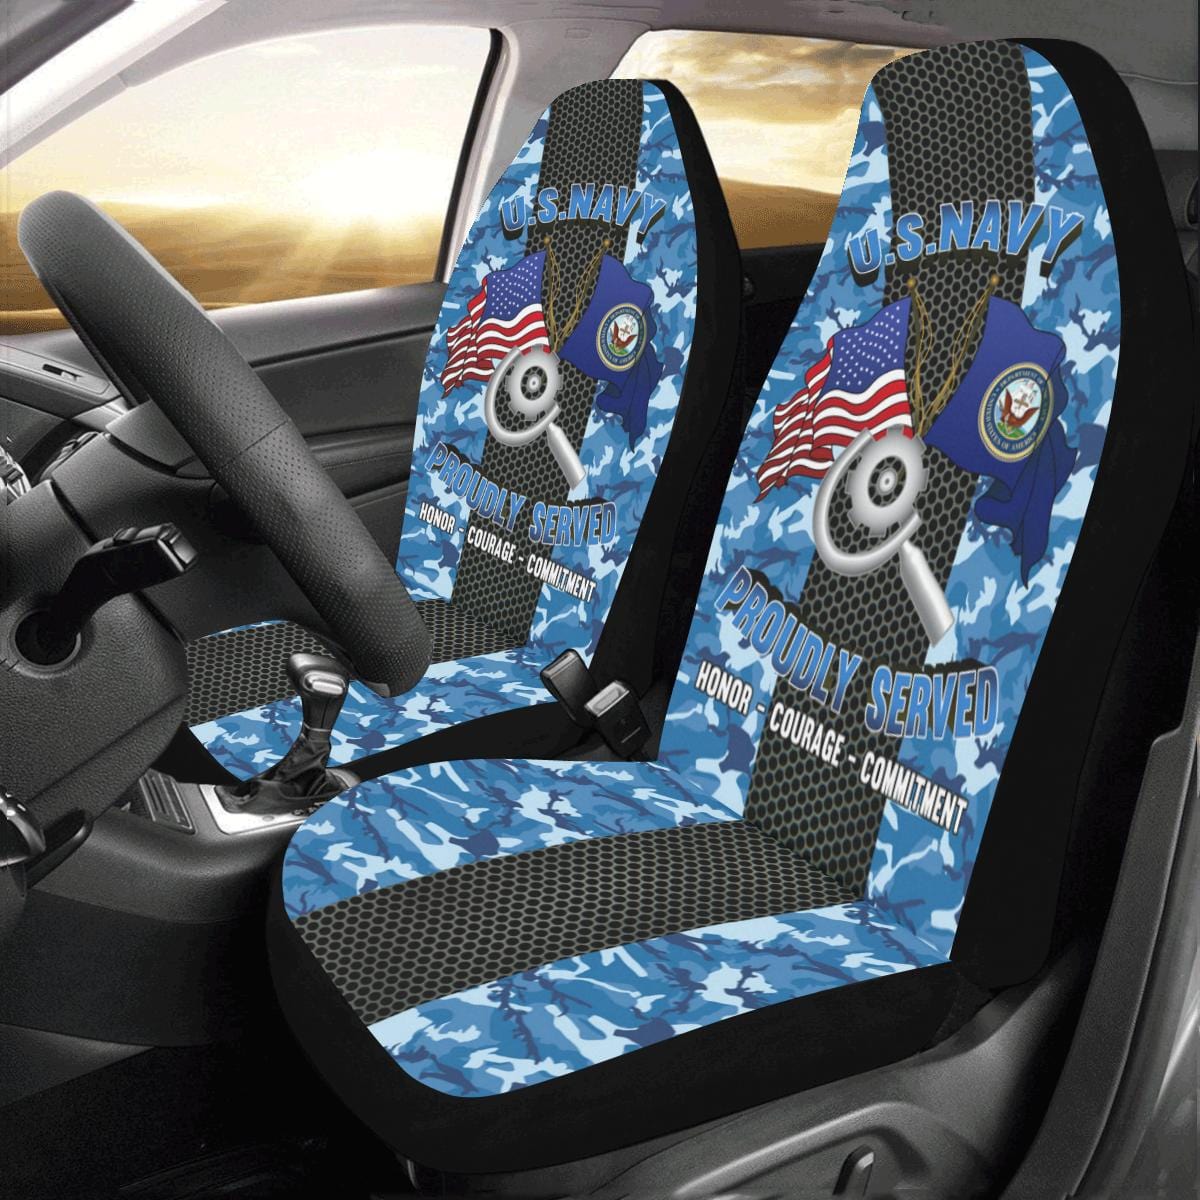 U.S Navy Machinery repairman Navy MR Car Seat Covers (Set of 2)-SeatCovers-Navy-Rate-Veterans Nation